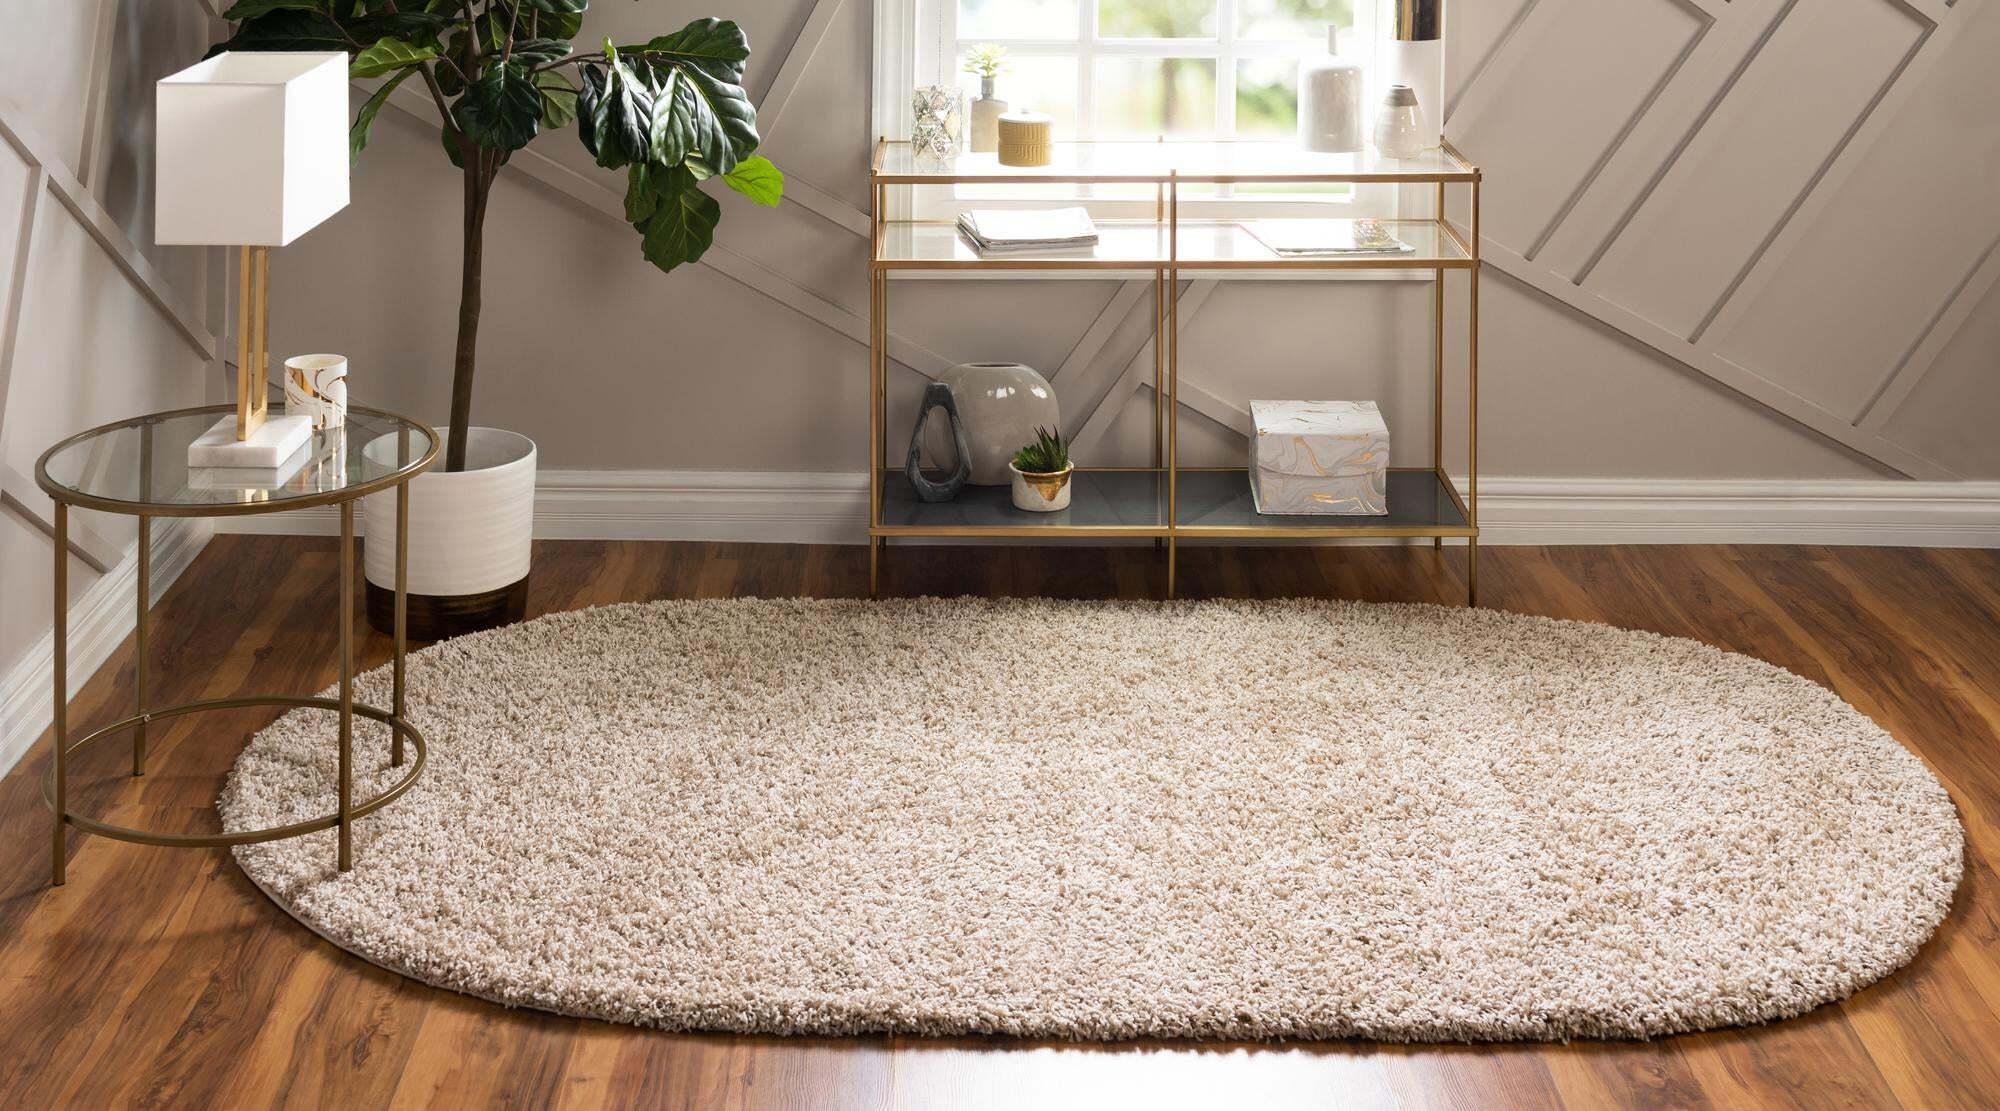 Unique Loom Indoor Rugs - Solid Shag Solid Oval 8x10 Oval Rug Taupe